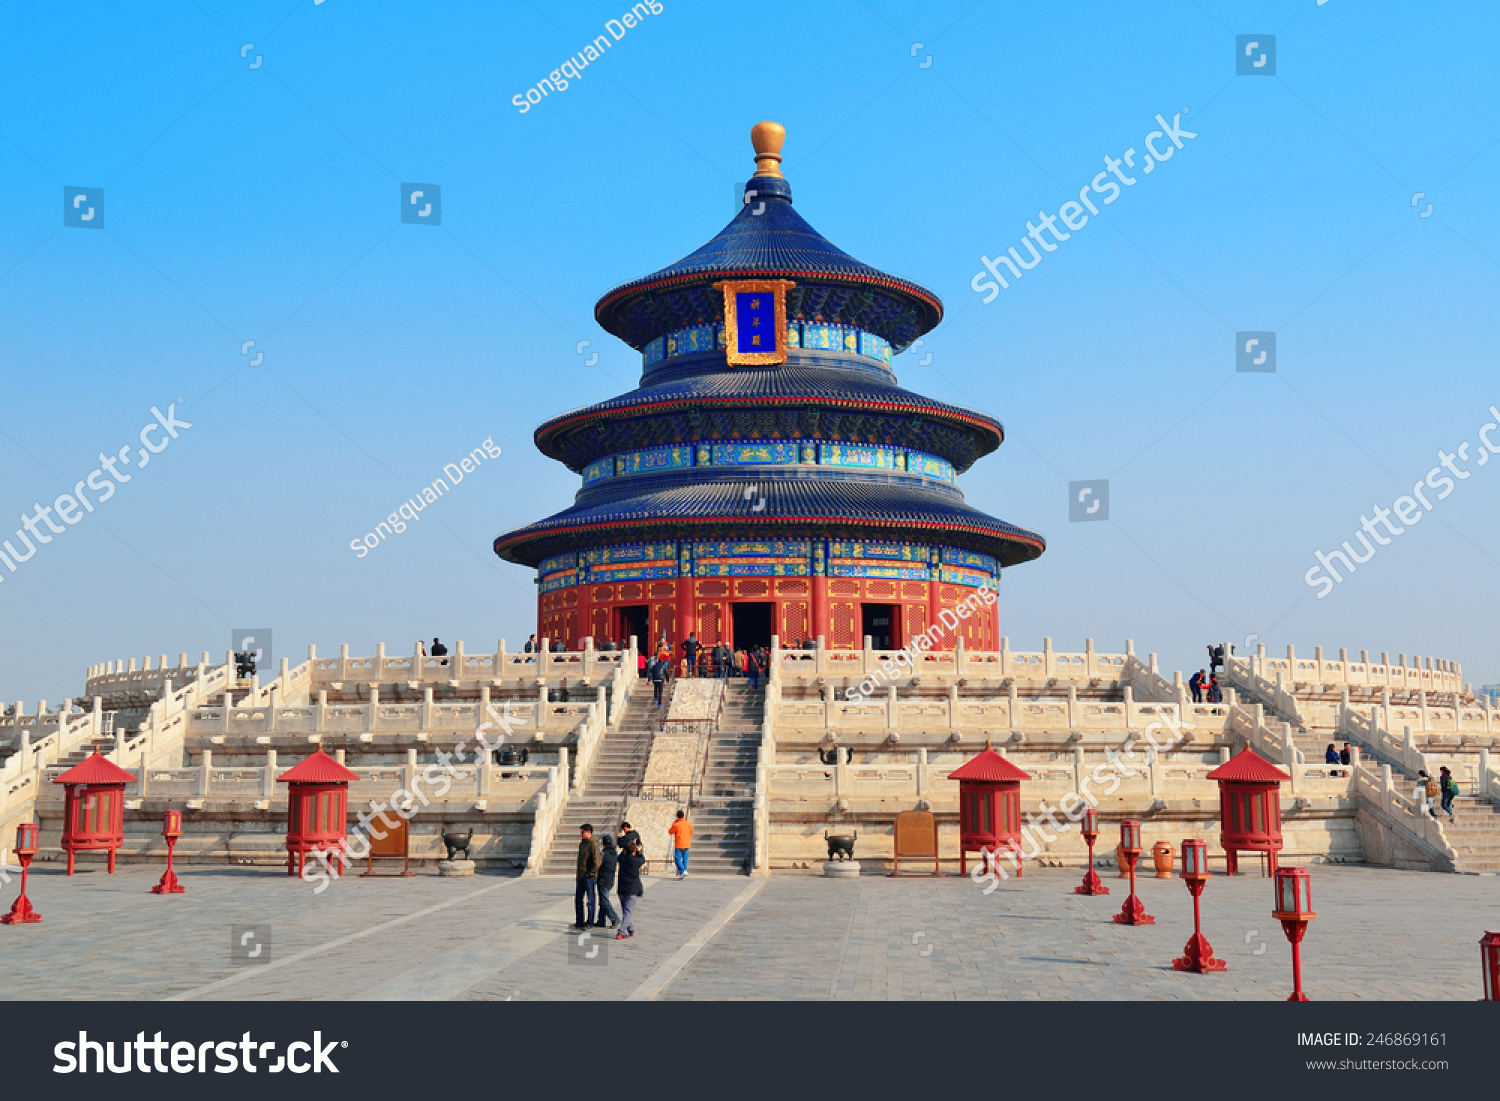 BEIJING, CHINA - APR 6: Temple of Heaven with tourists on April 6, 2013 in Beijing, China. It is the religious complex where the Emperors pray to the Heaven for good harvest. #246869161